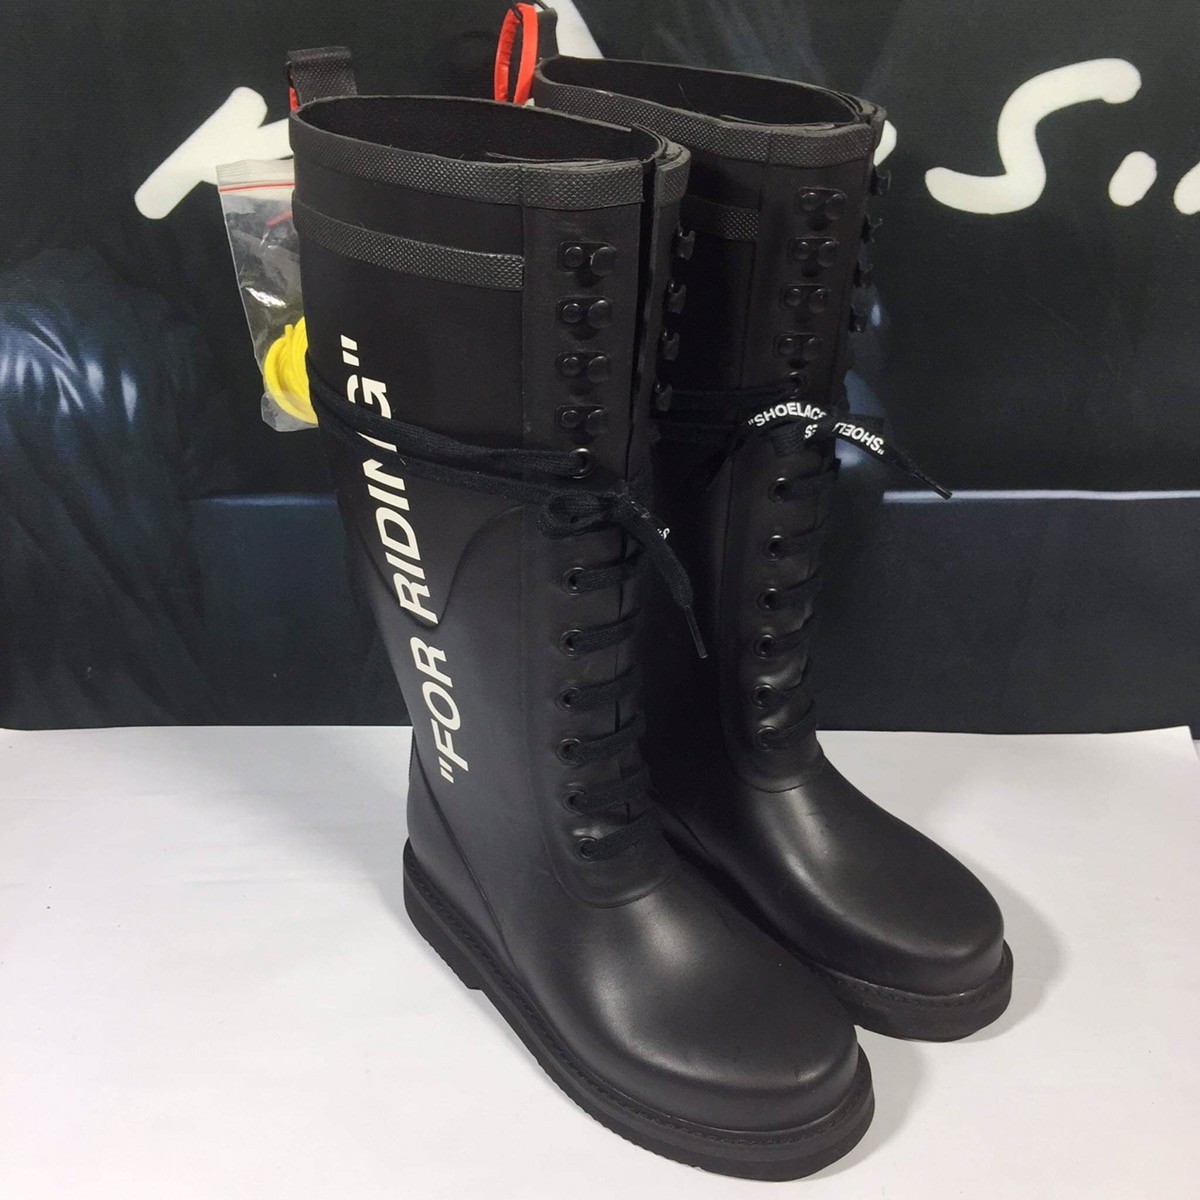 “For Riding “ Black Rubber Boots - 2